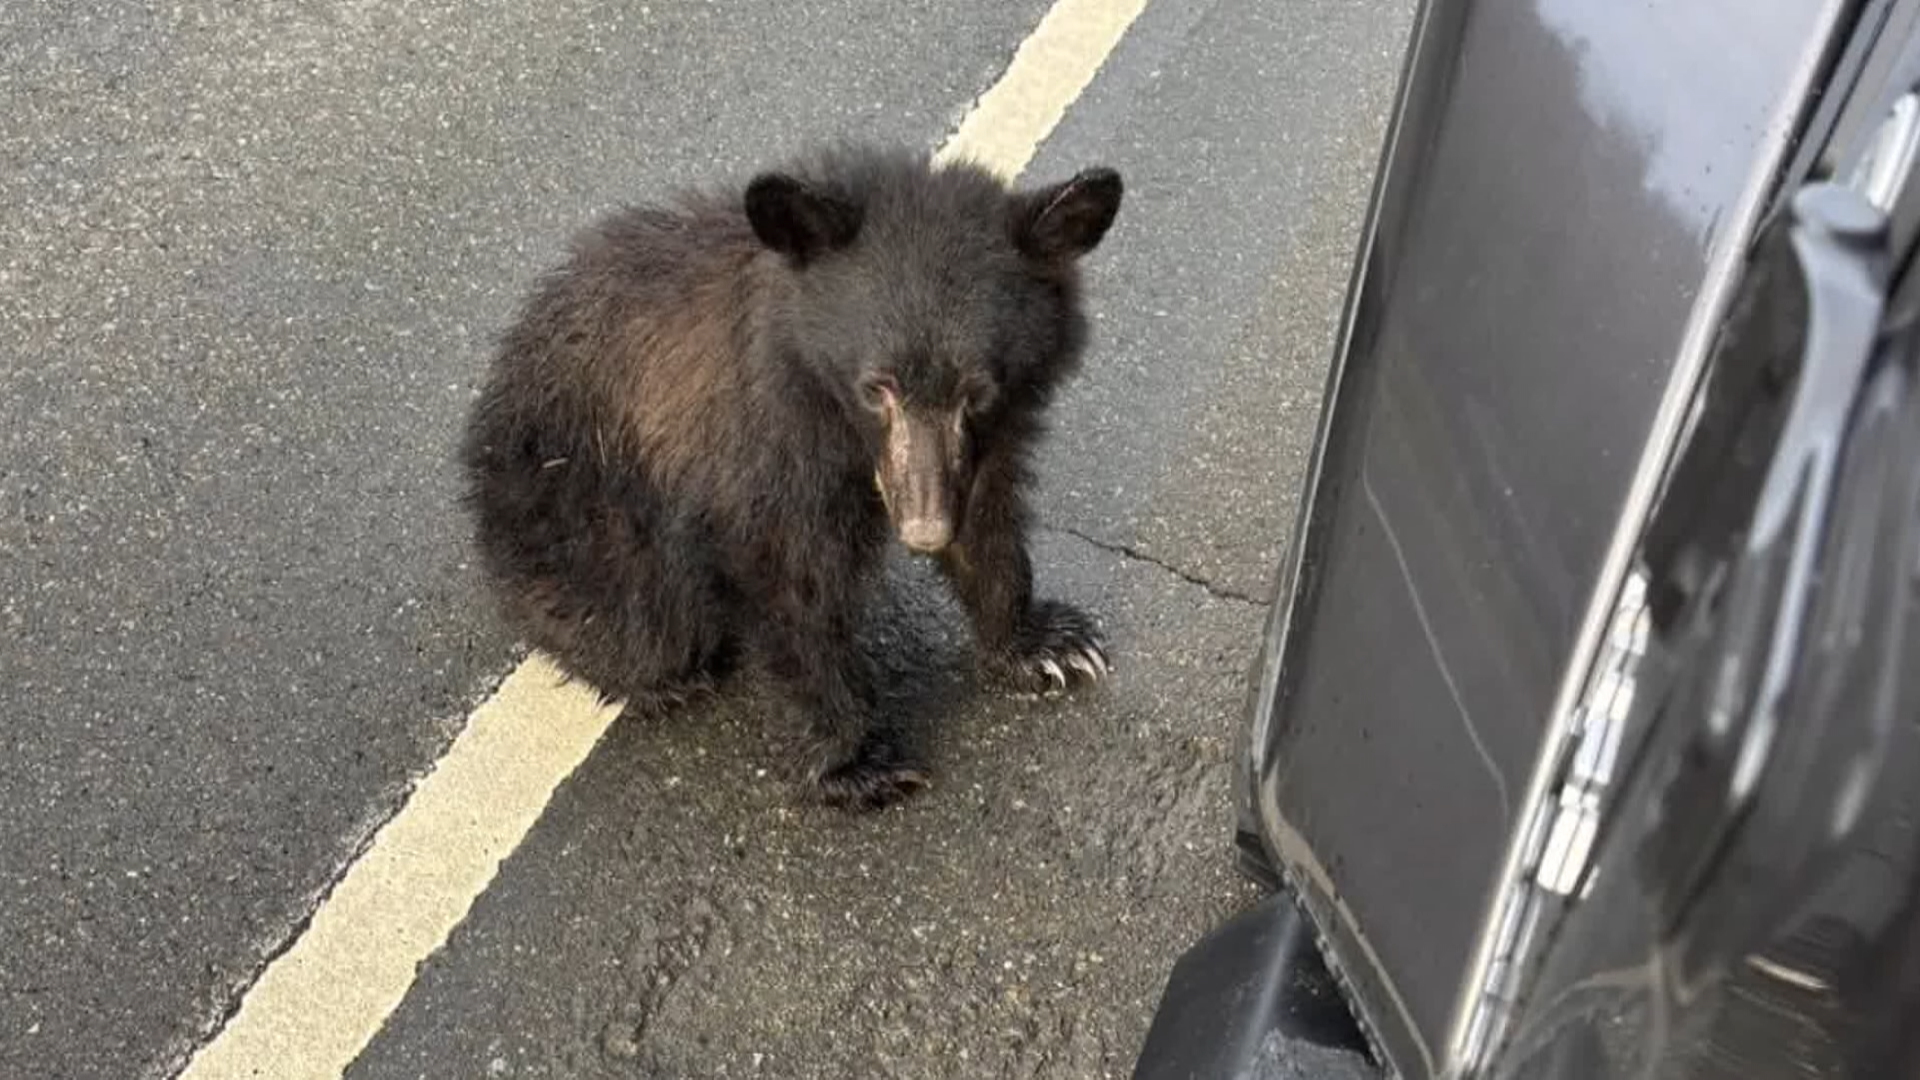 Bear cub found in middle of Comox Valley highway euthanized